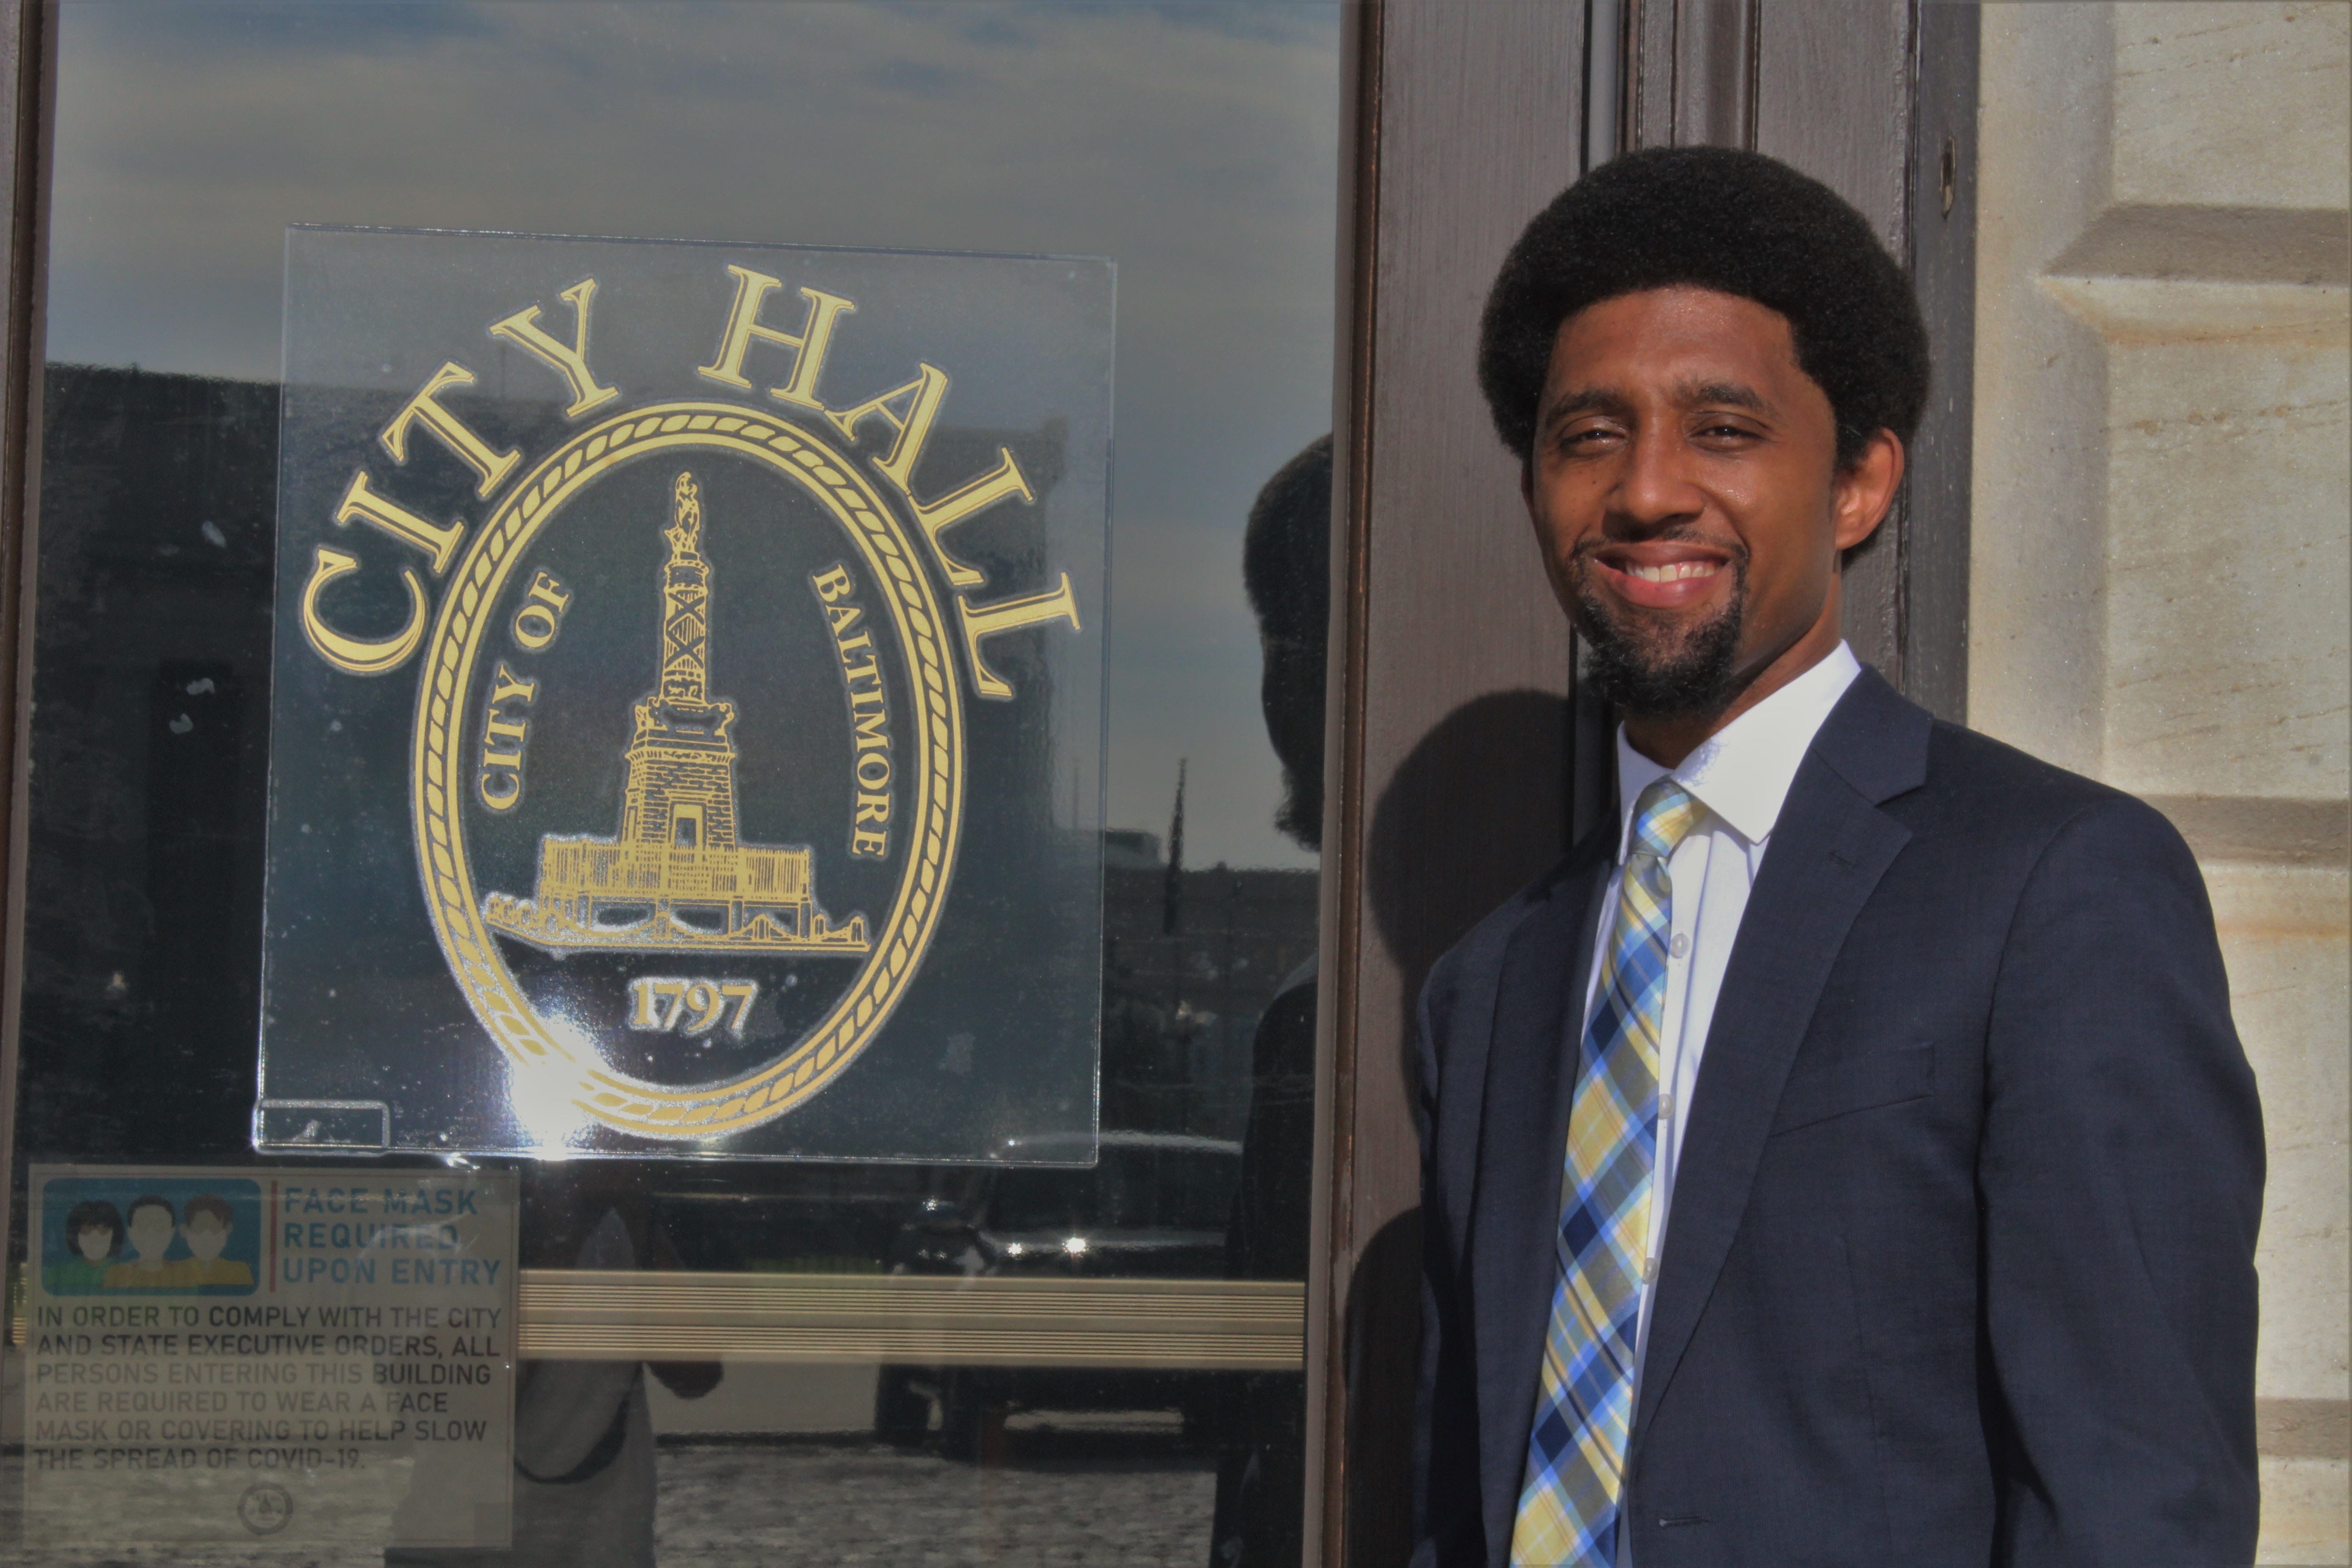 Baltimore City Council President Brandon Scott is shown outside of city hall on July 31, 2020.